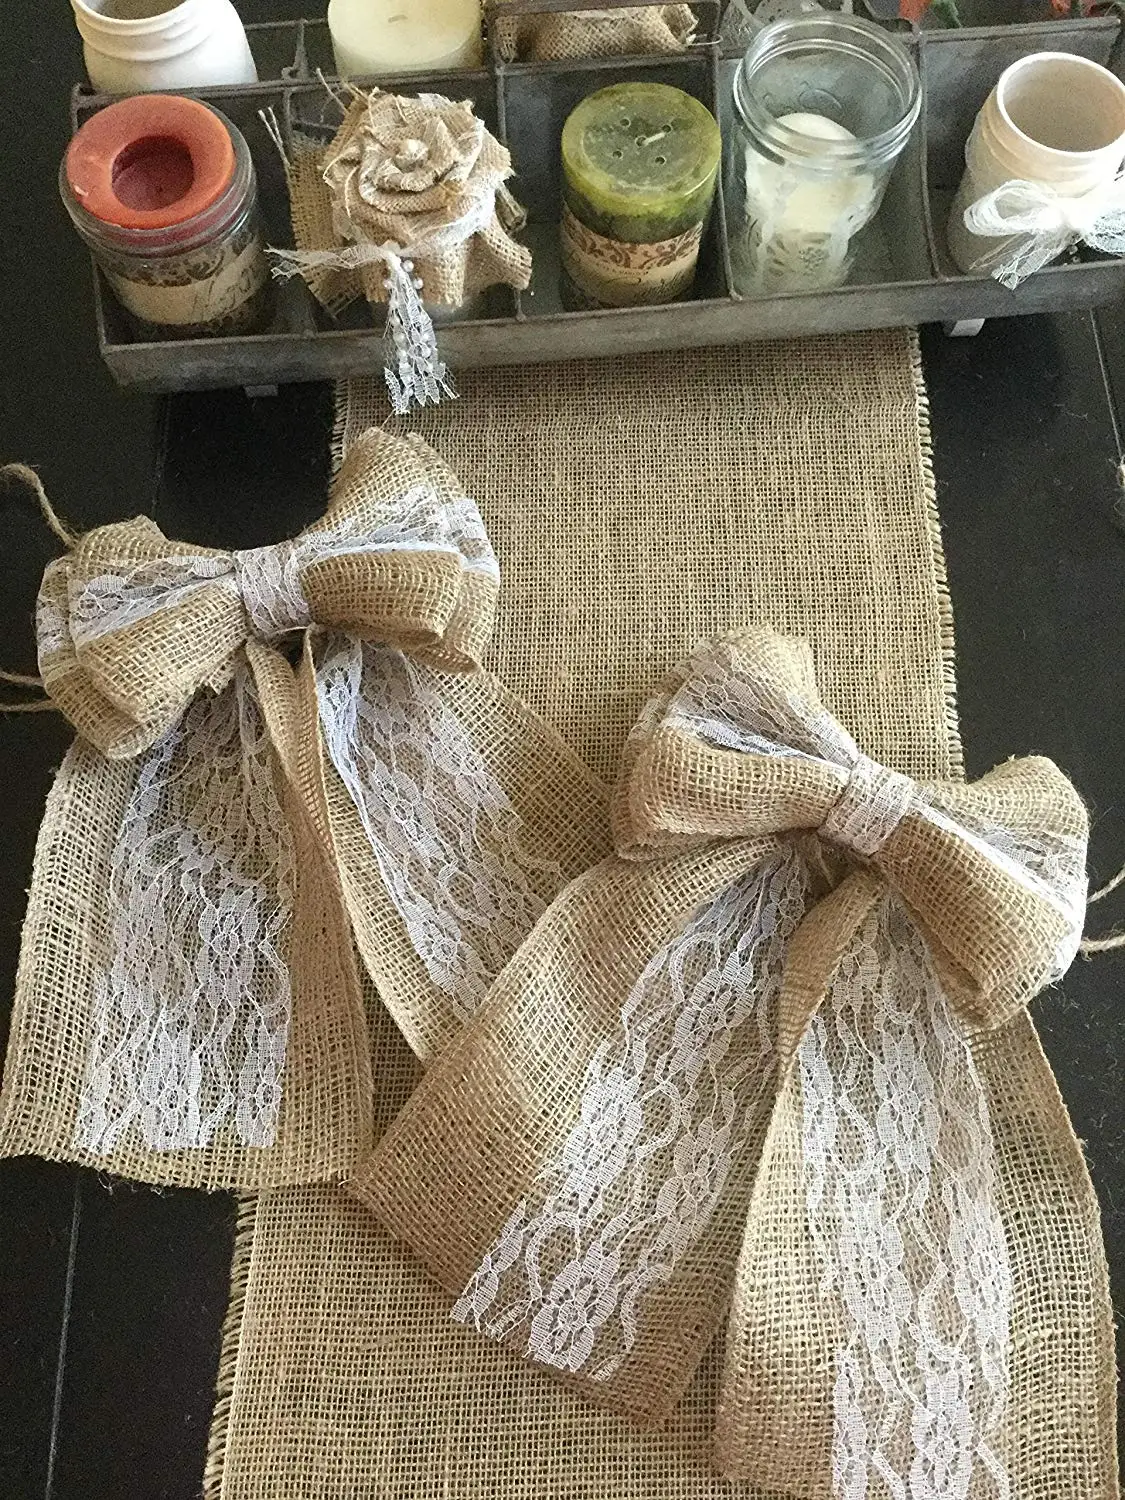 Cheap Pew Bows For Wedding Find Pew Bows For Wedding Deals On Line